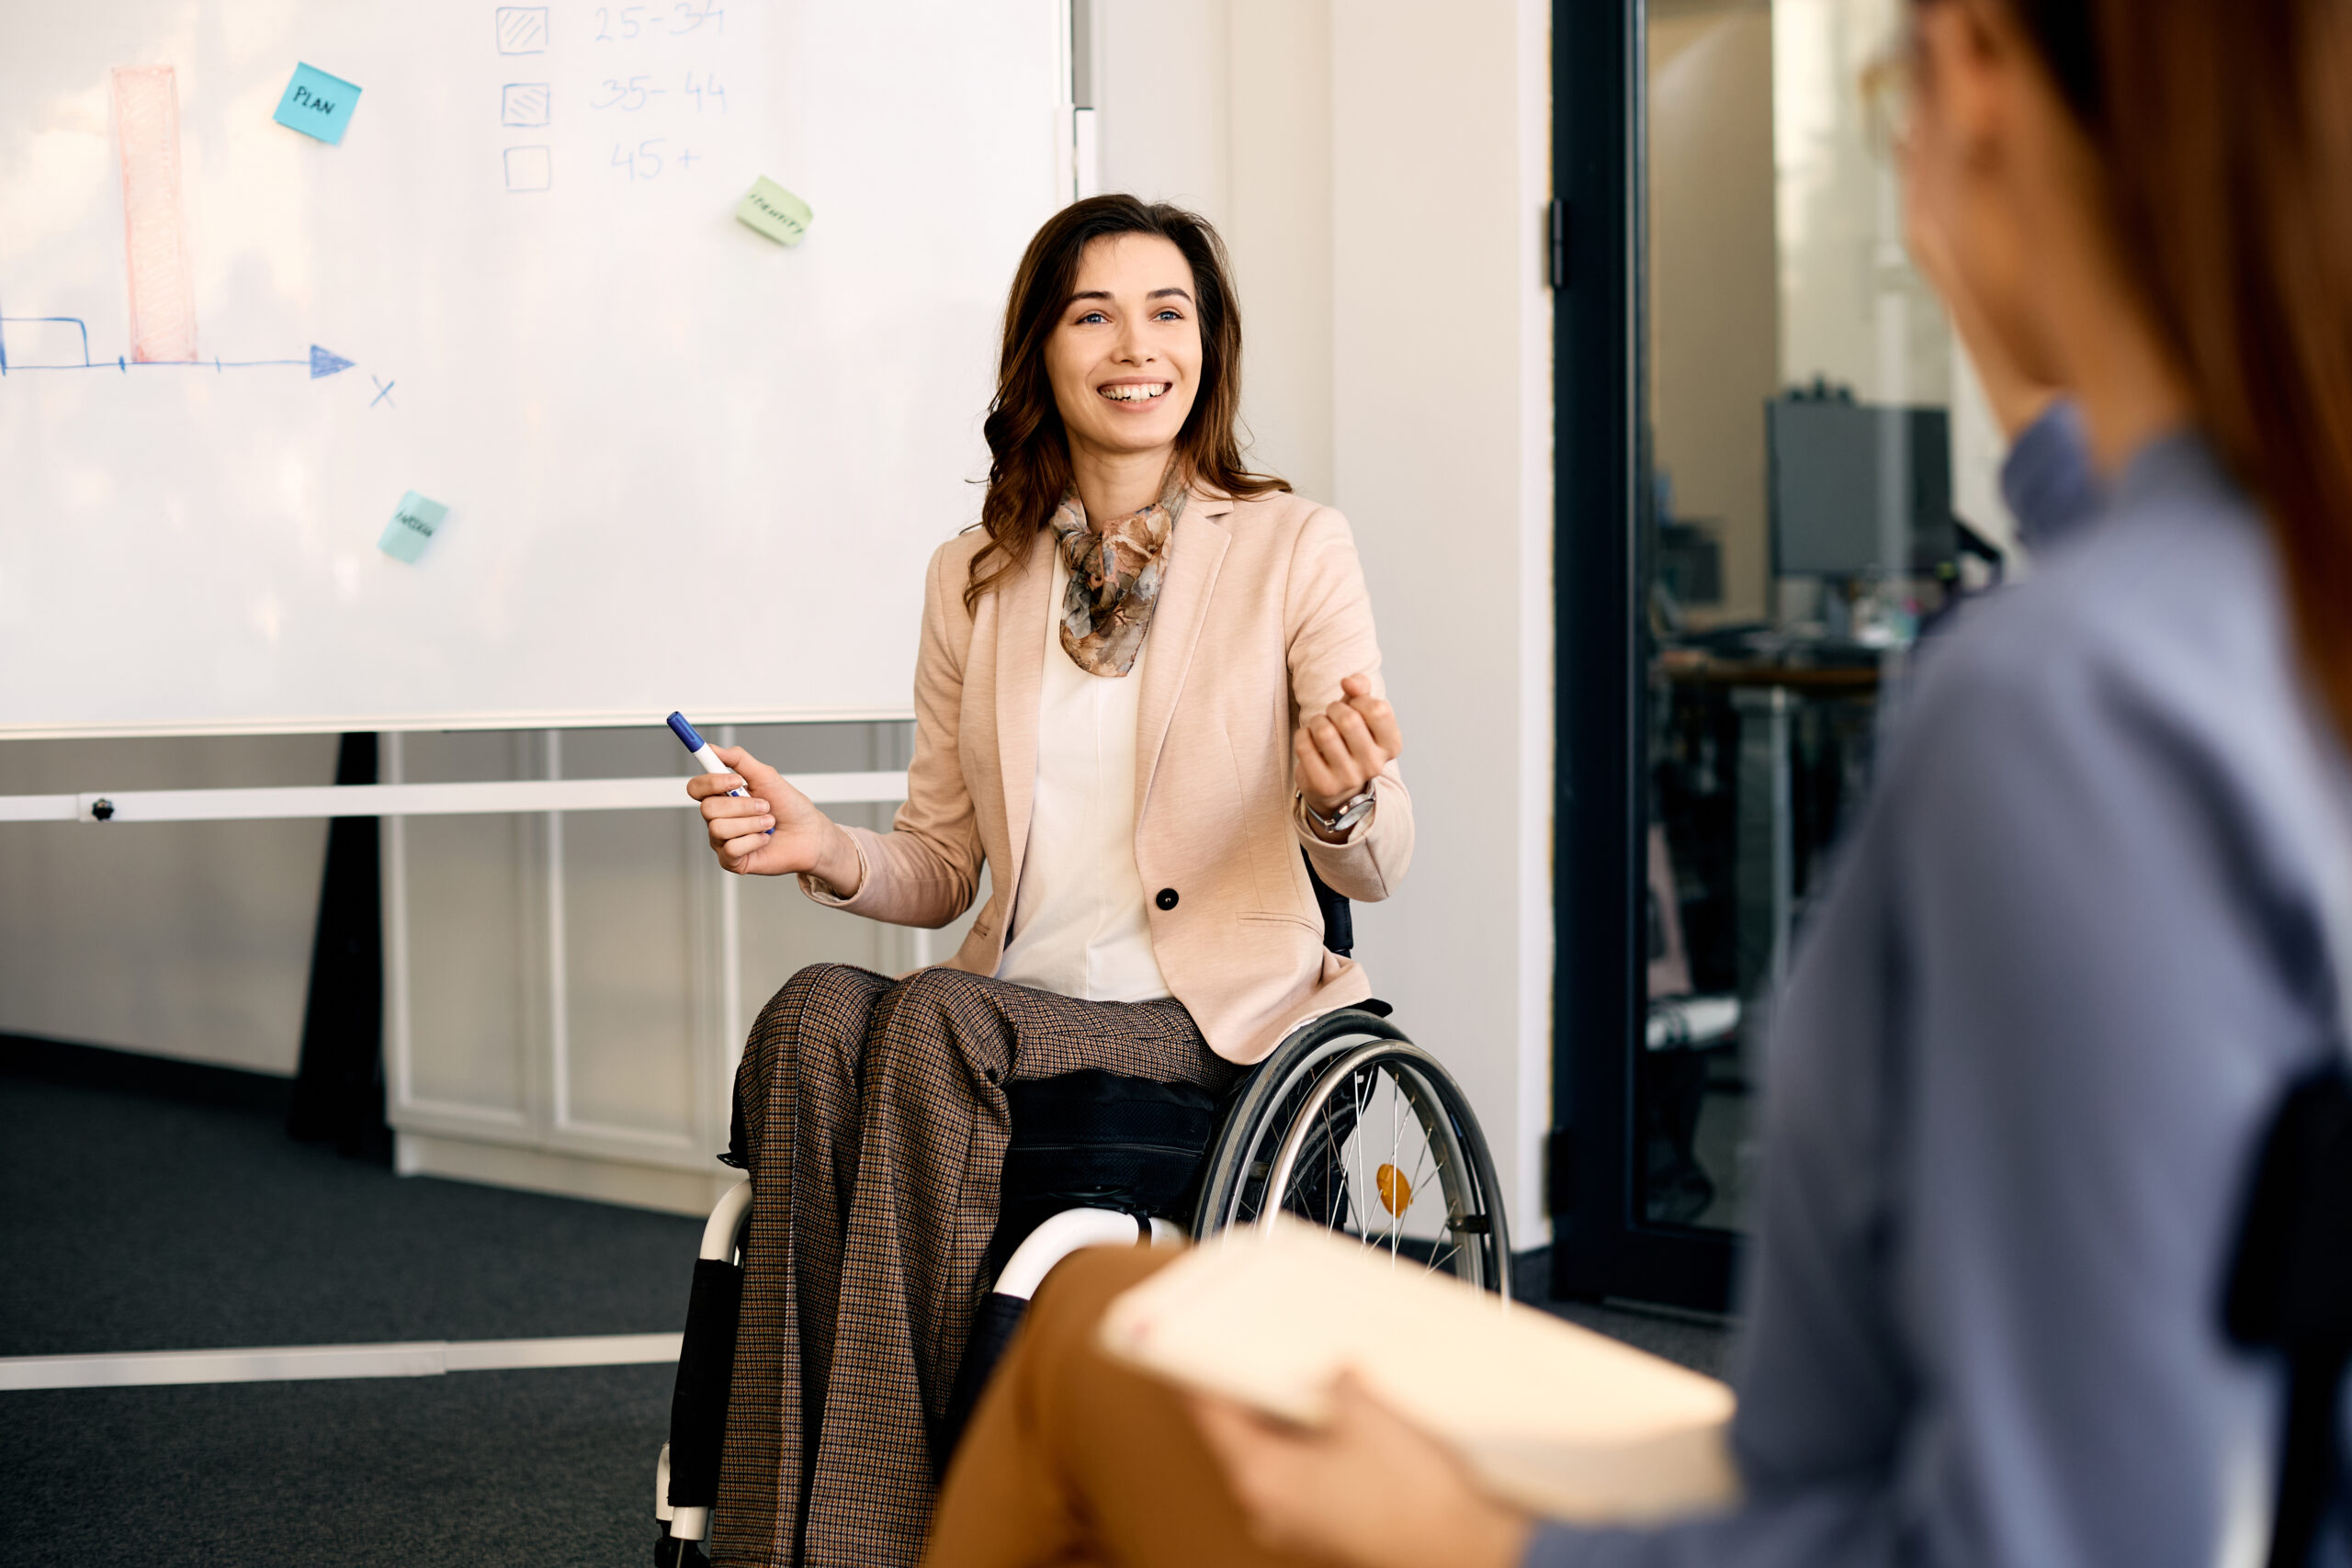 Happy businesswoman in wheelchair presenting new ideas on whiteboard to colleagues in the office.